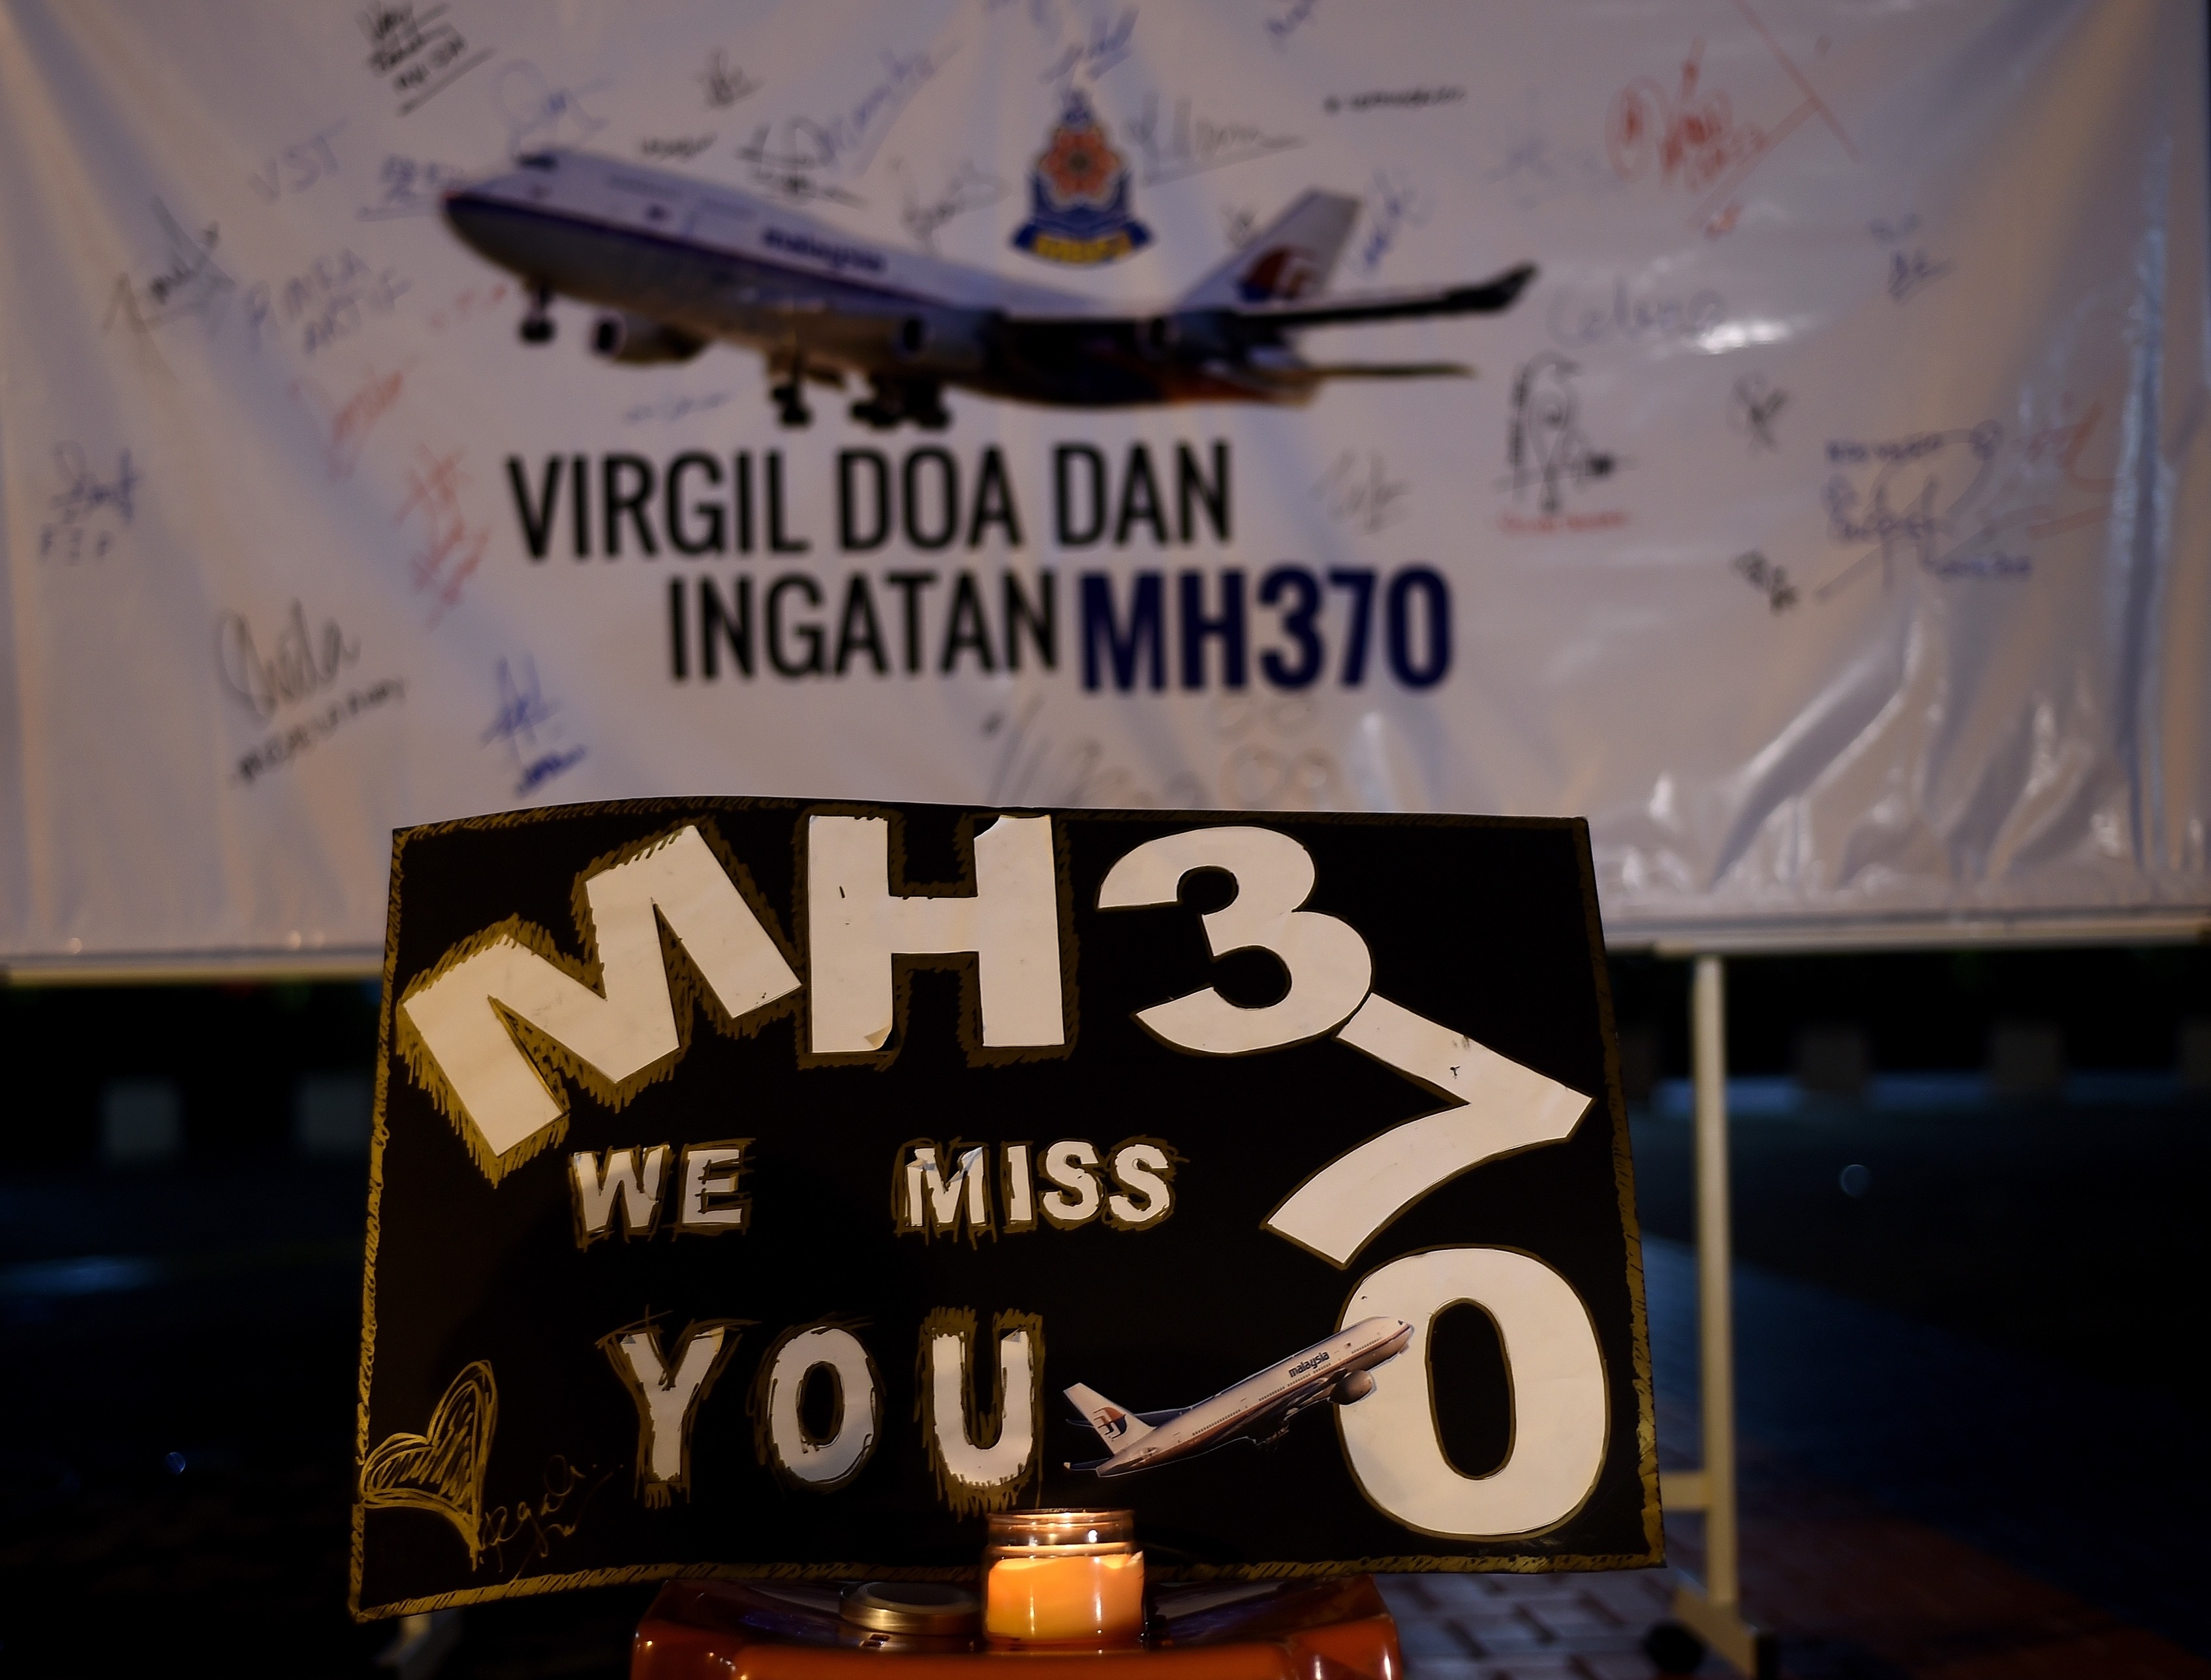 (FILES) This file picture taken on March 6, 2015 shows a board bearing solidarity messages during a gathering to mark the one-year anniversary of the disappearance of Malaysia Airlines flight MH370 in Kuala Lumpur.  The deep ocean hunt for missing passenger jet MH370 has been suspended after nearly three years without result, the Australian, Malaysian and Chinese governments said on January 17, 2017. / AFP PHOTO / MANAN VATSYAYANA